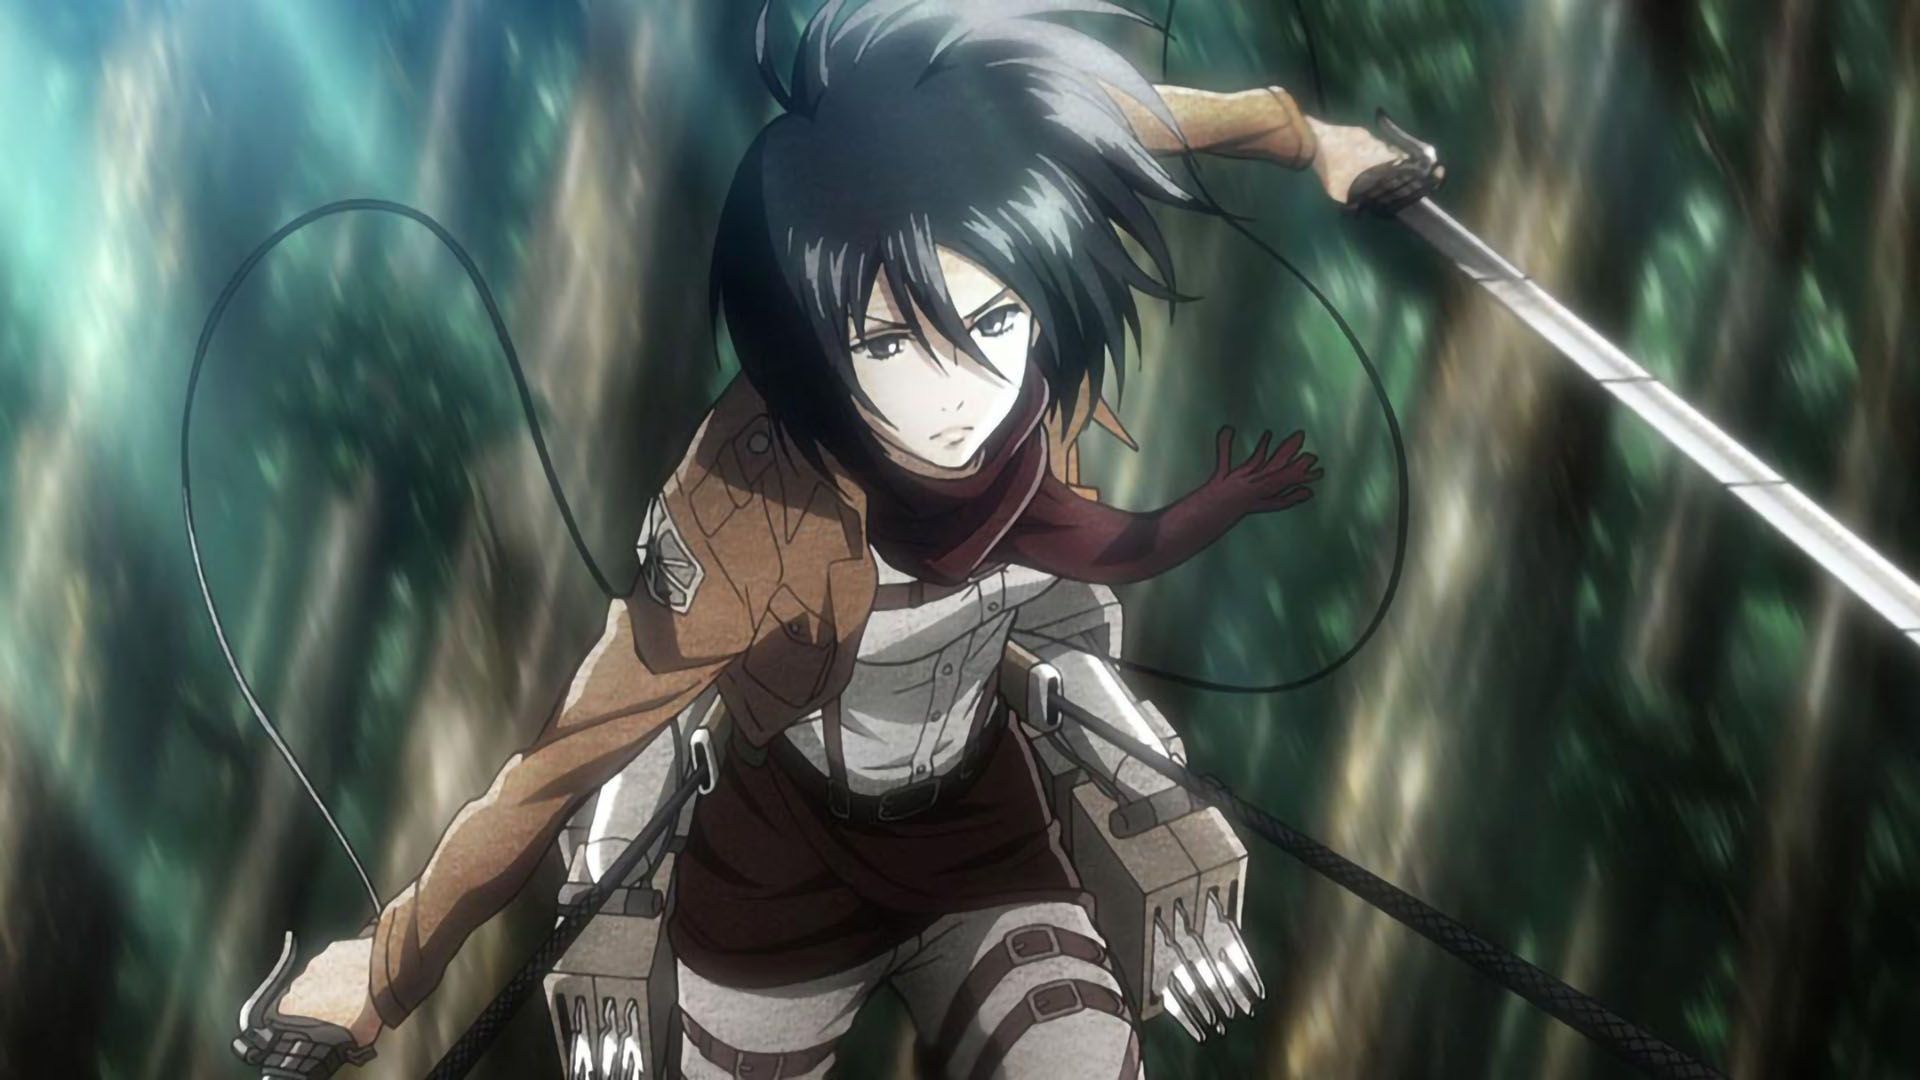 List of All Attack on Titan Anime Characters Ranked by Fans